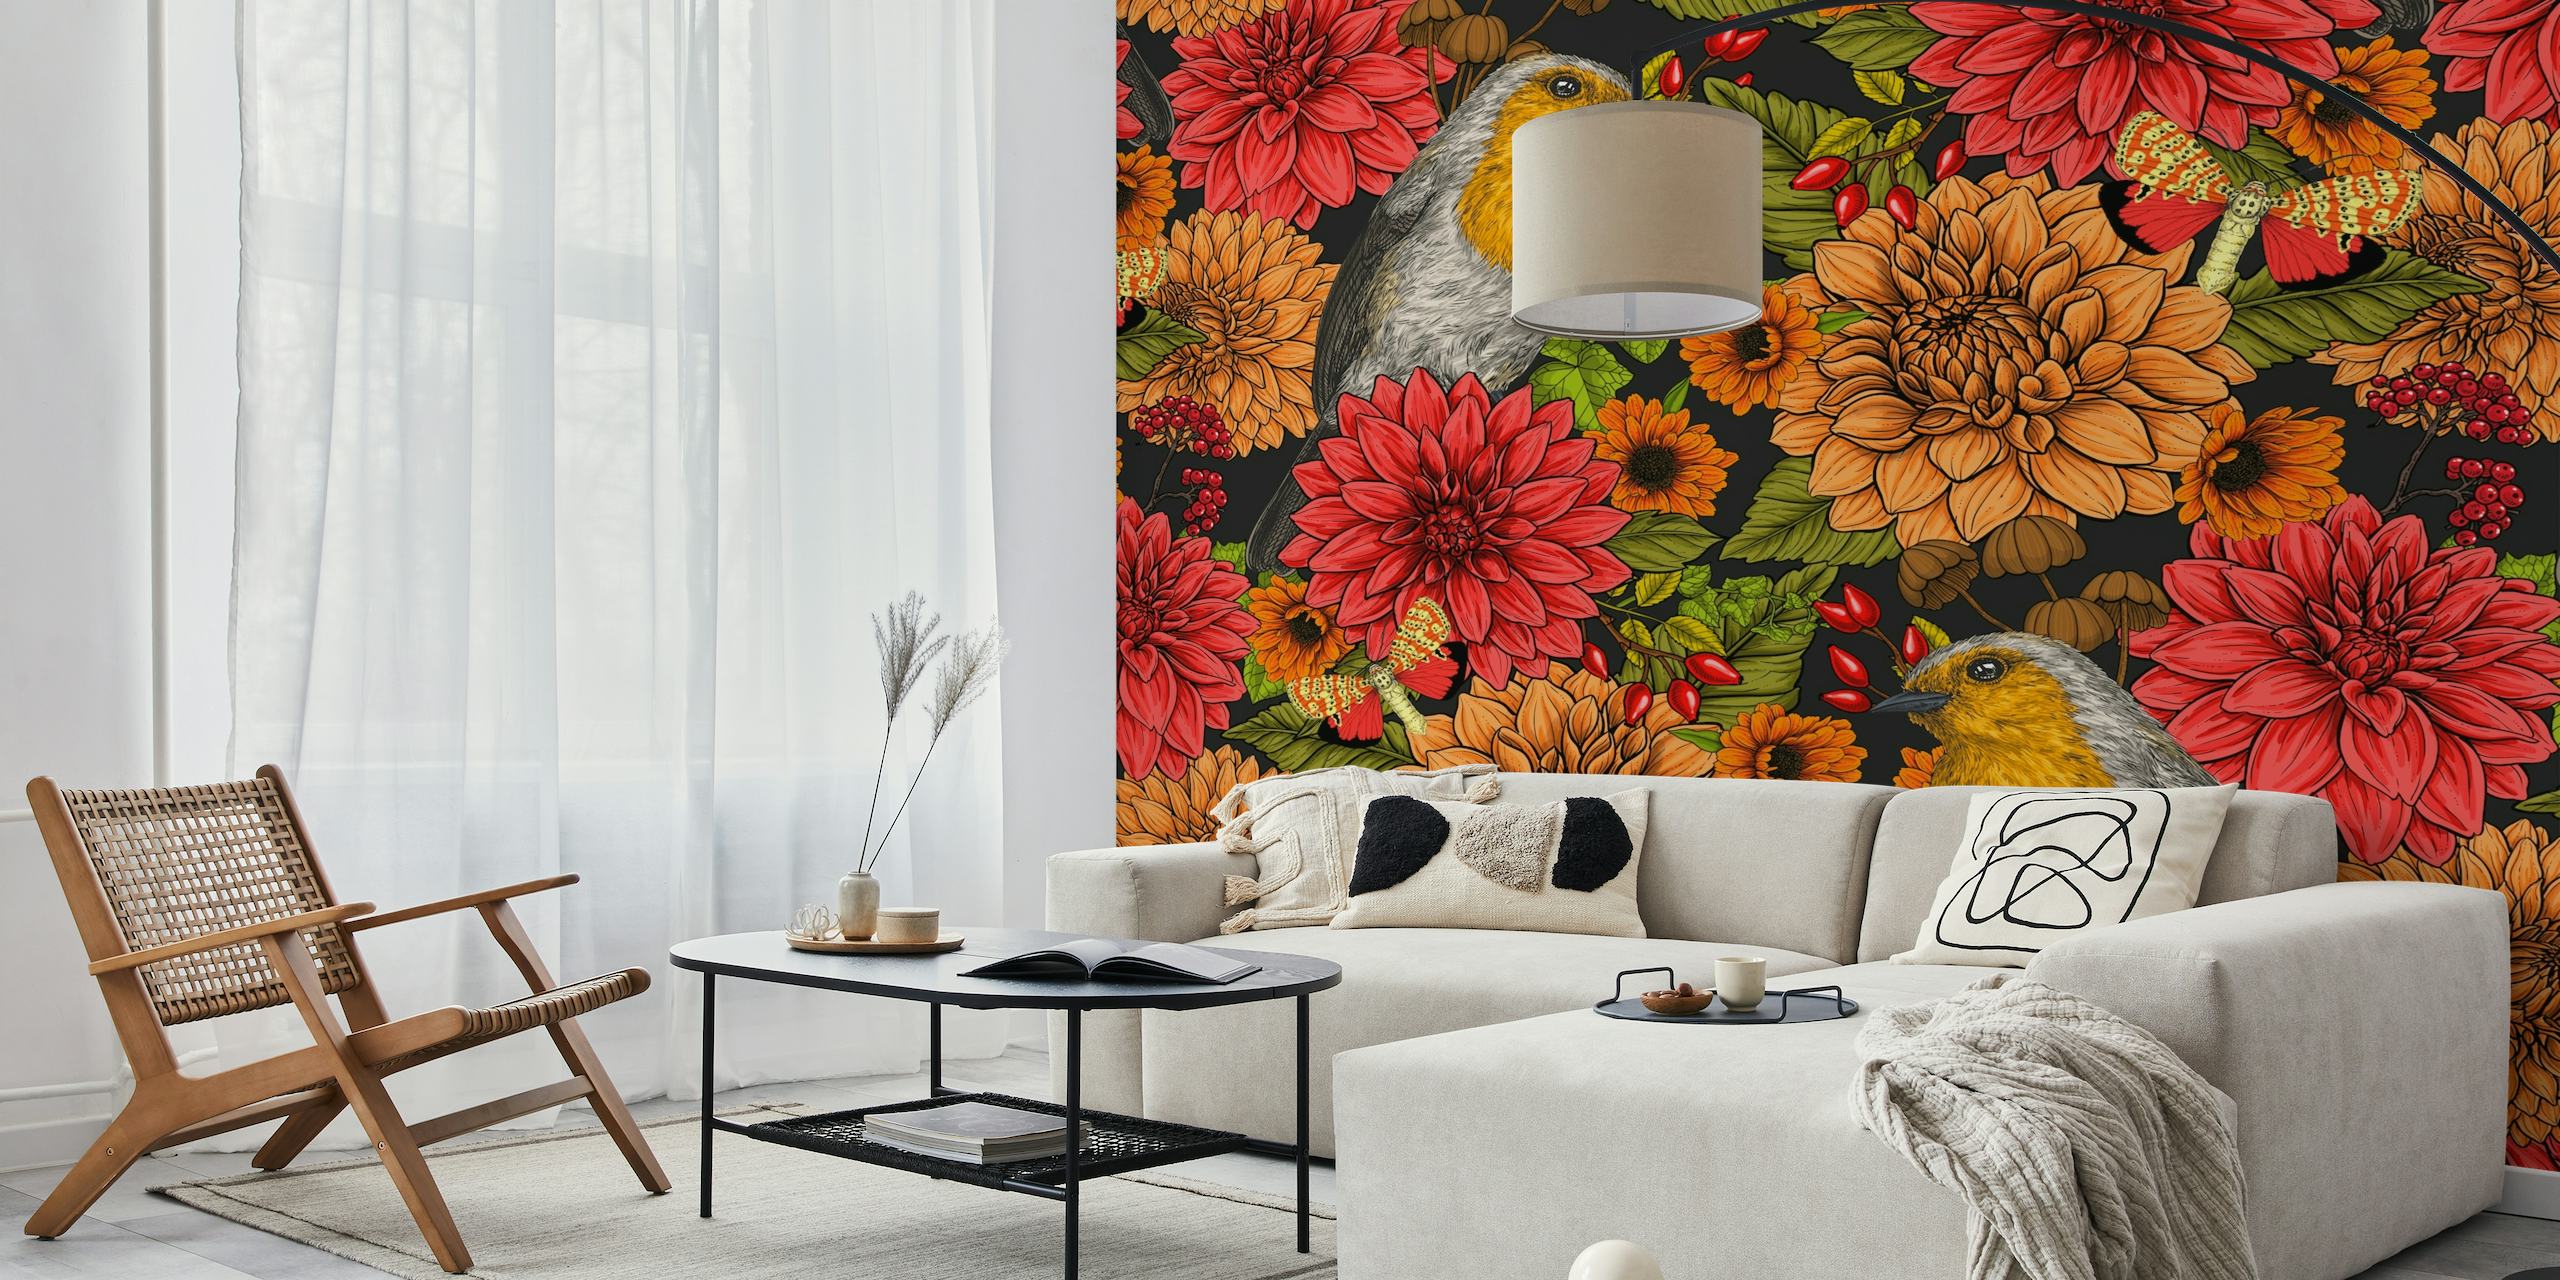 A wall mural with robins and colorful flowers on a dark background, creating a lively garden scene.